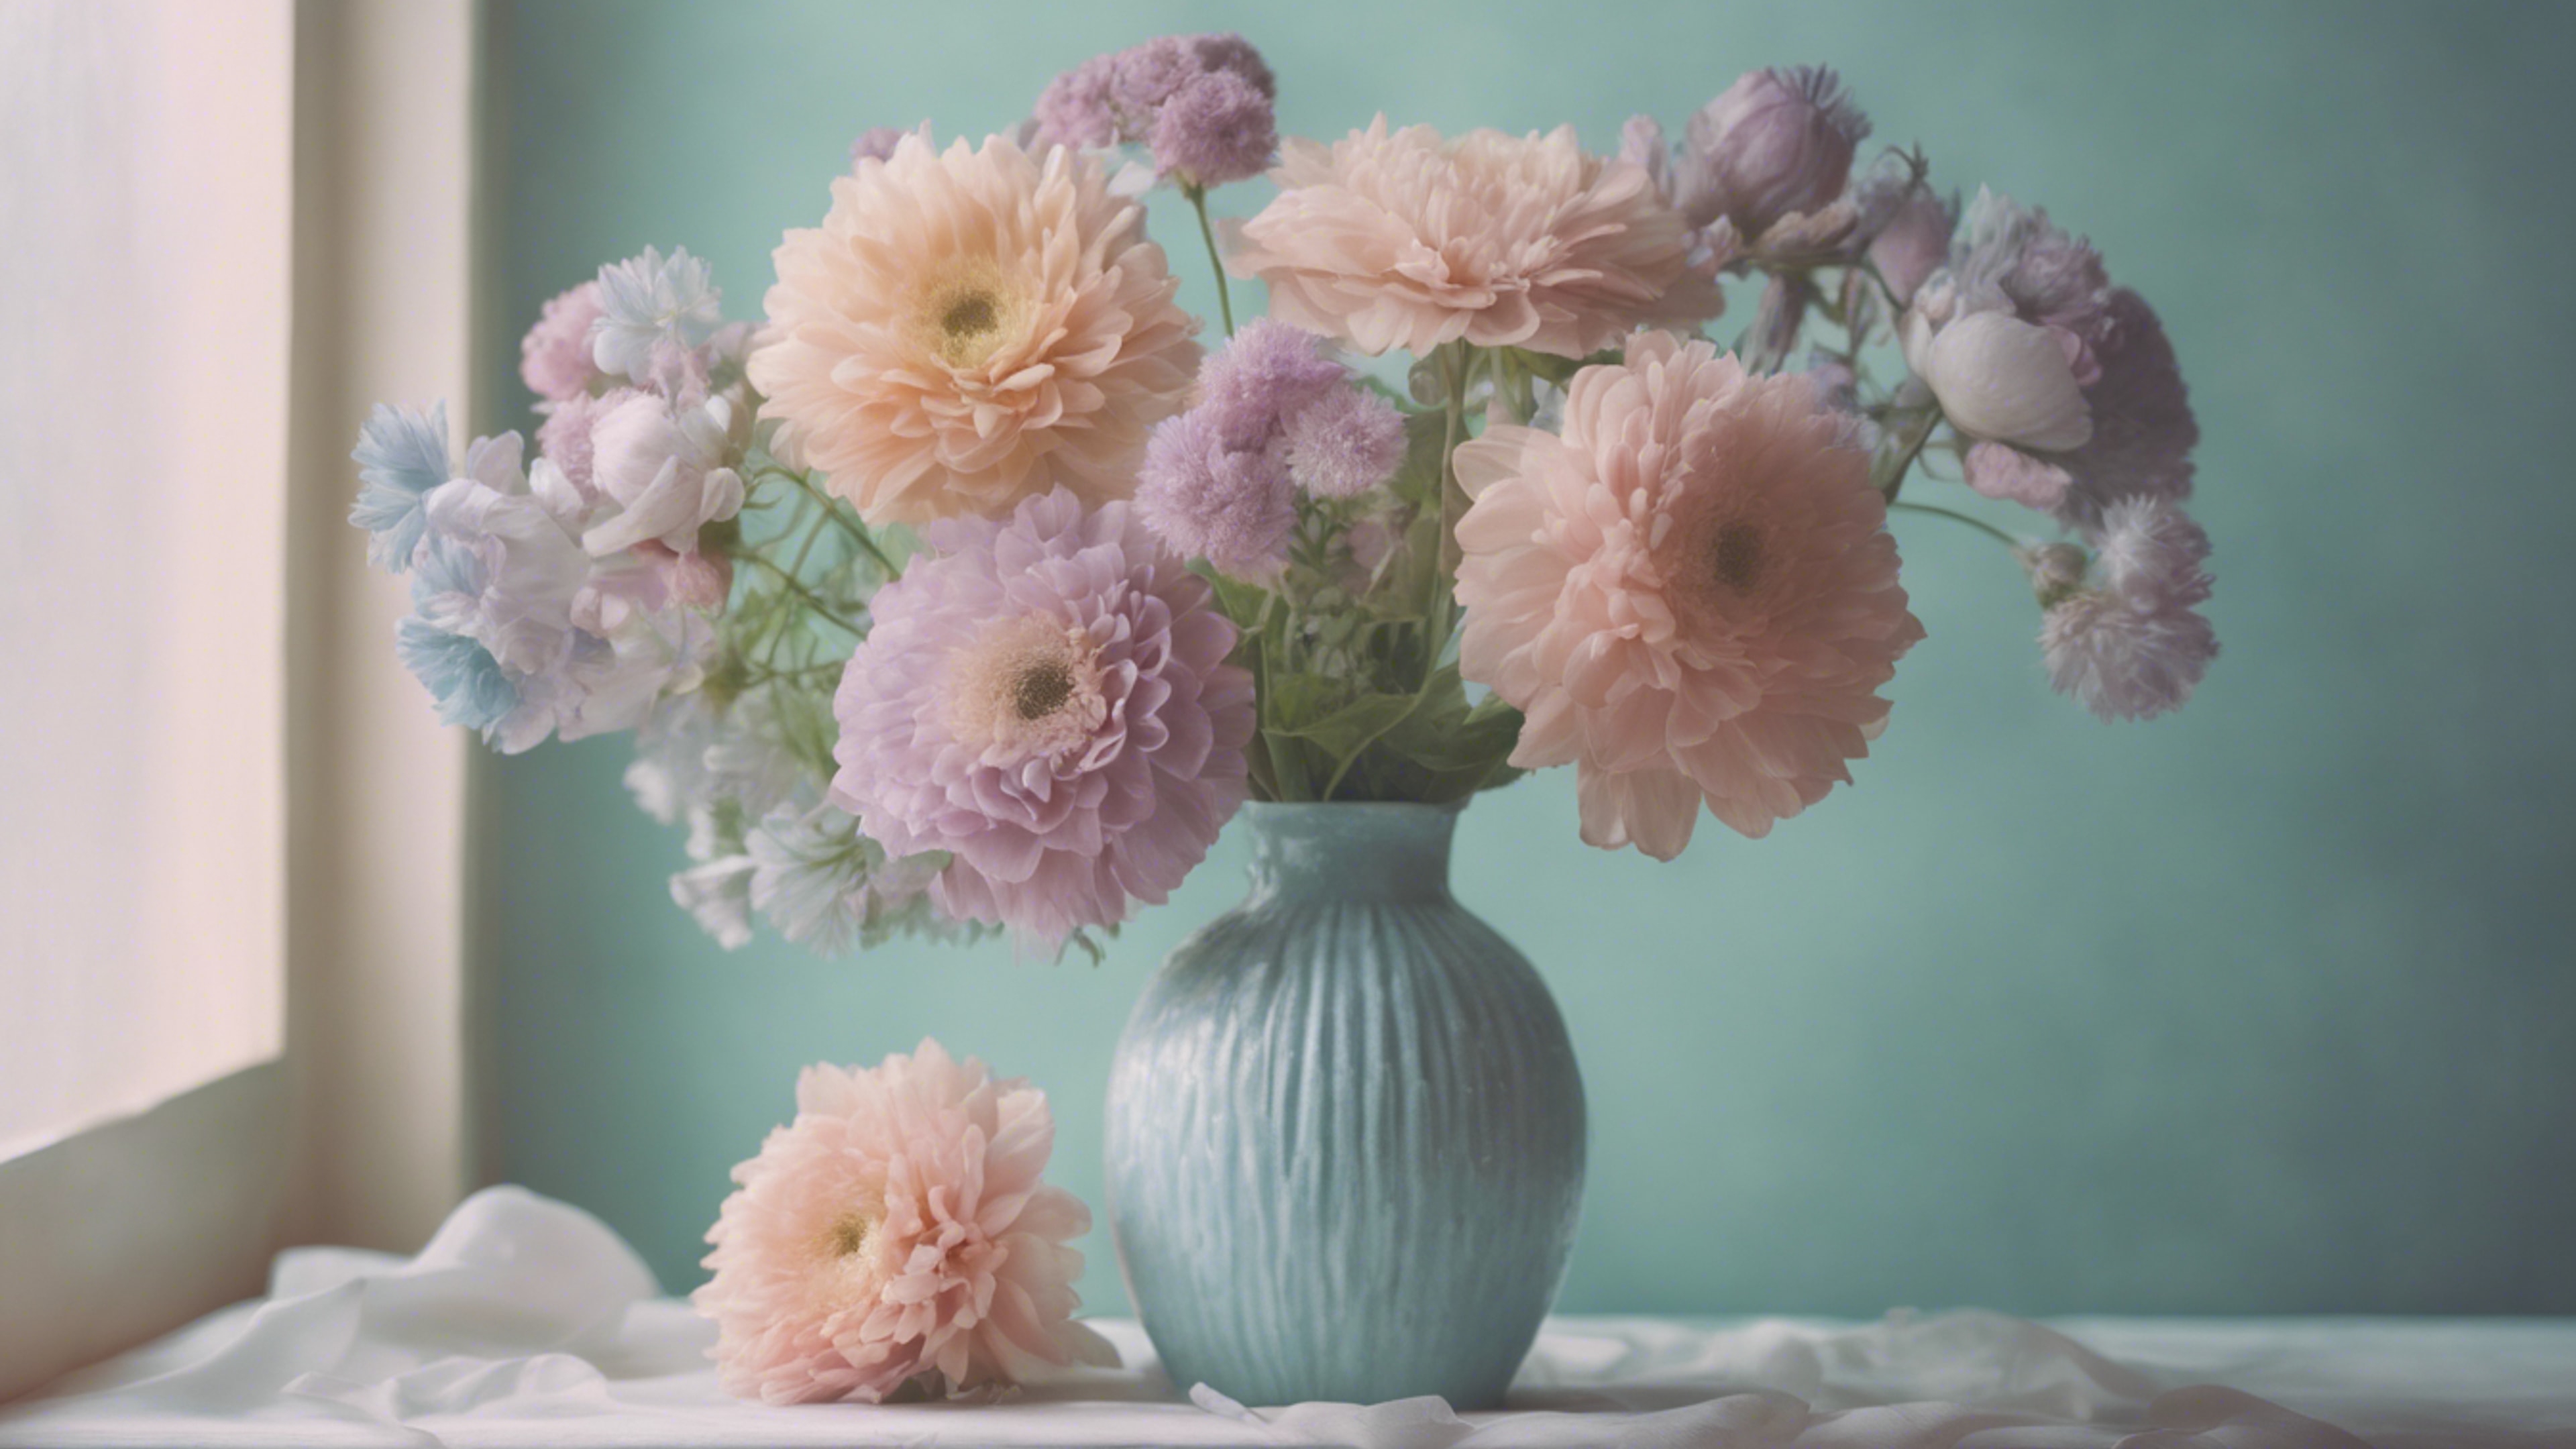 A pastel toned still-life painting featuring cool pastel colored flowers in a vase. 벽지[6e1327f815a34bc2b32b]